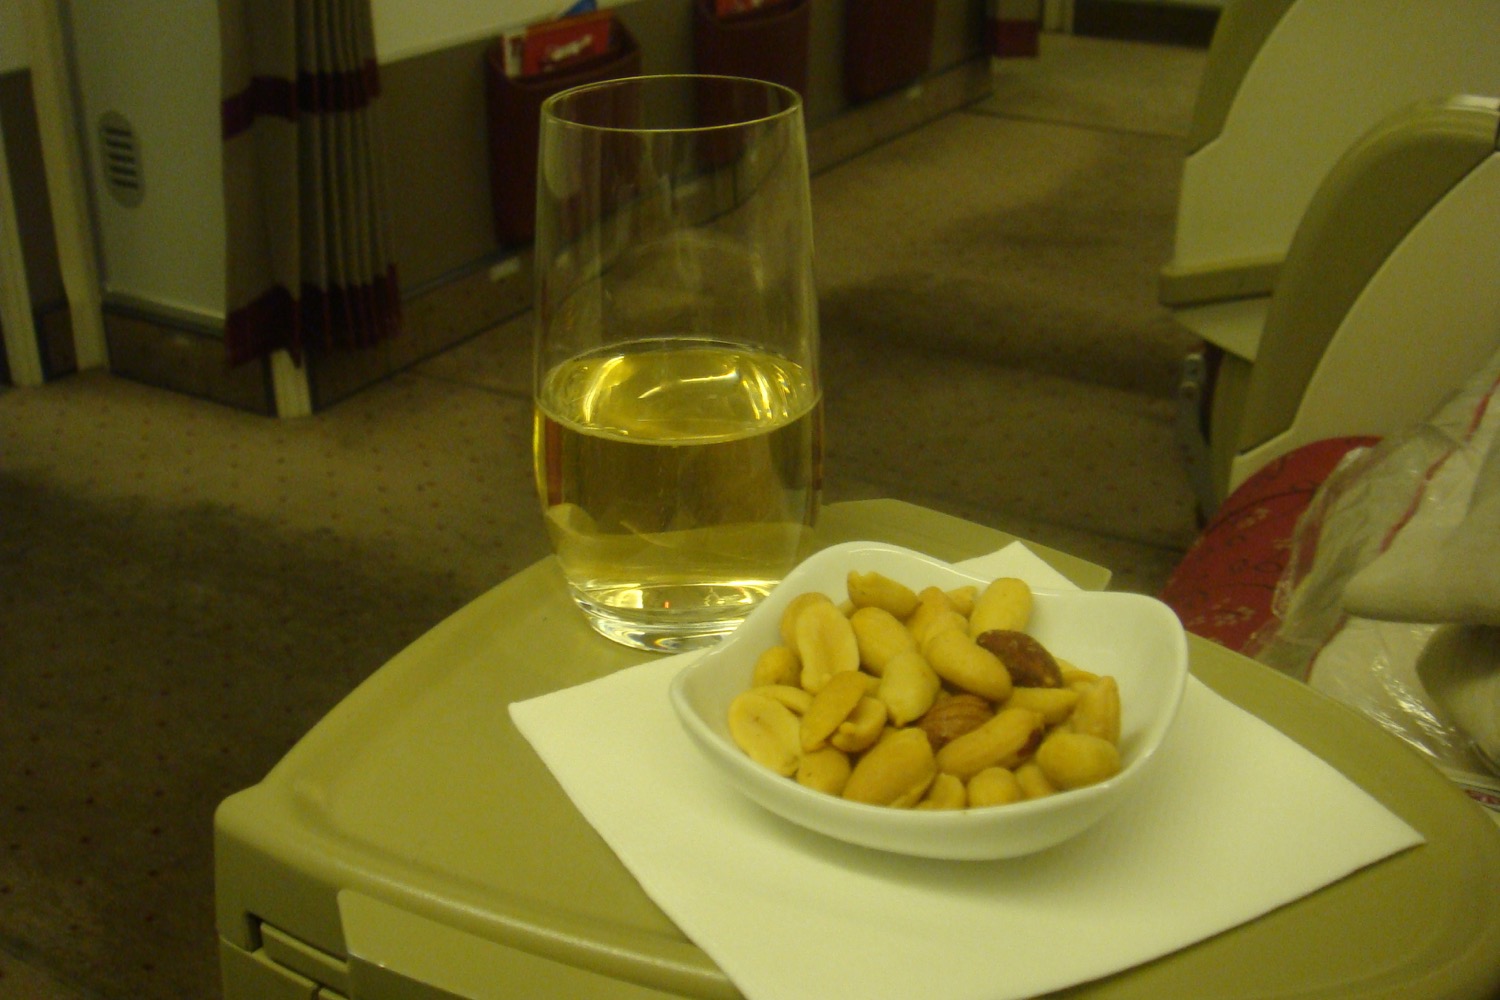 a bowl of nuts and a glass of liquid on a tray